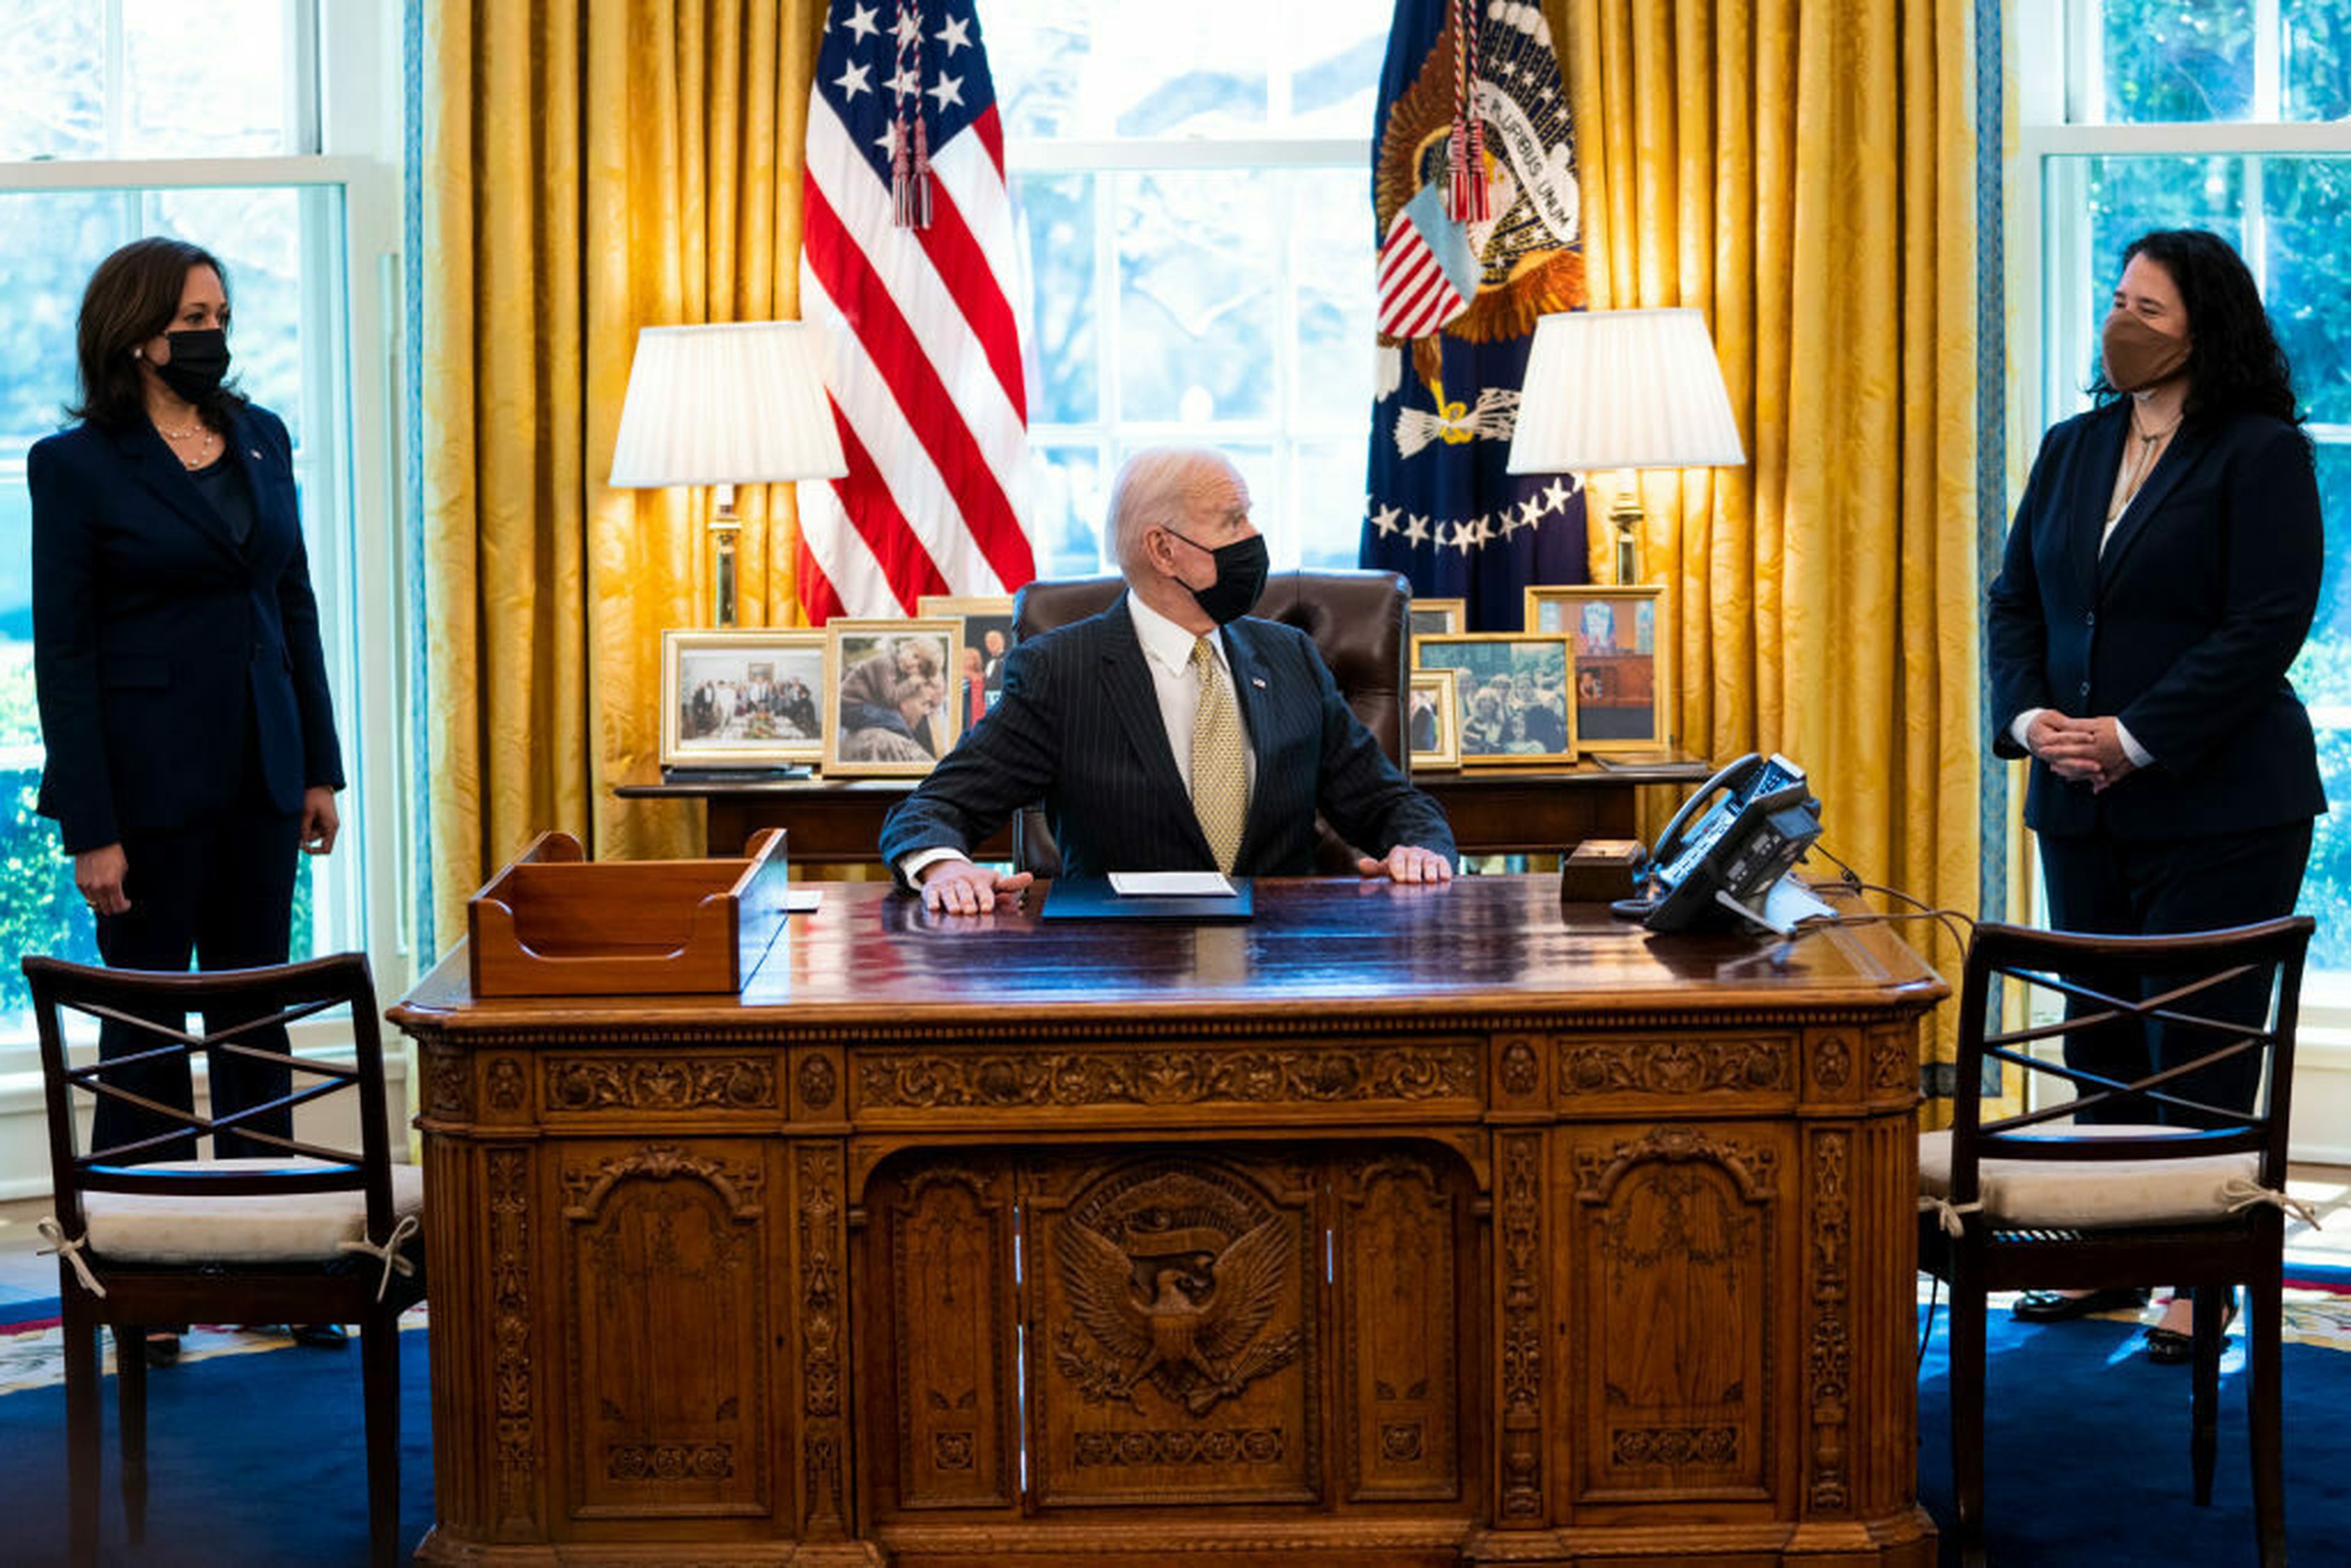 Flanked by Vice President Kamala Harris, left, and Administrator of the Small Business Administration (SBA) Isabella Casillas Guzman, right, President Joe Biden signs the Paycheck Protection Program (PPP) extension in the Oval Office on March 30, 2021, in Washington. A cybersecurity audit of the Small Business Administration found that pandemic rel...